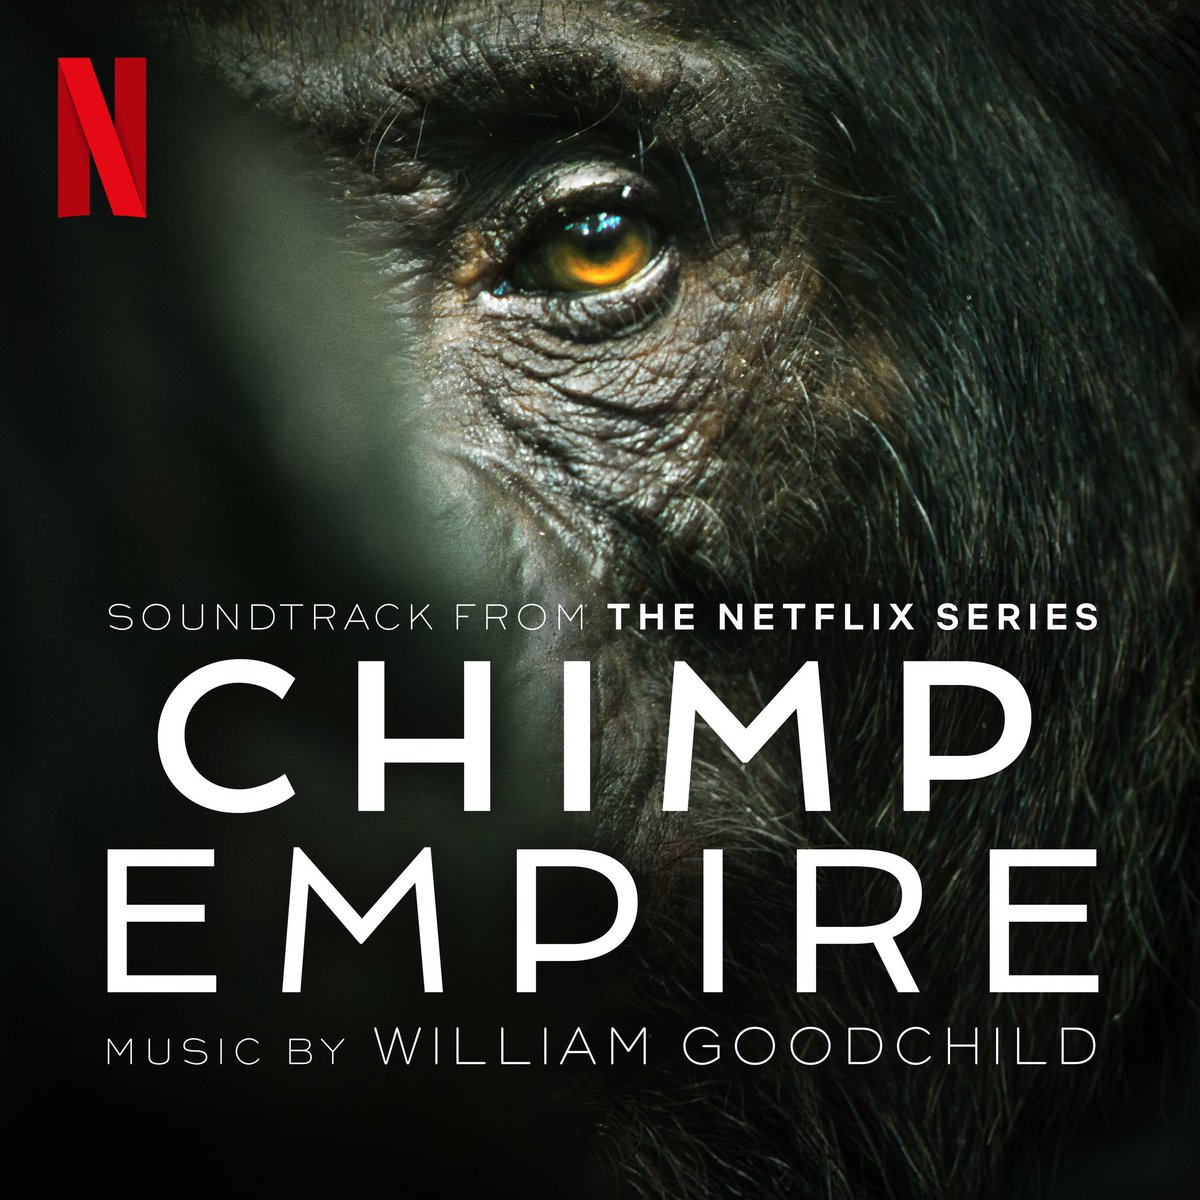 To live in the jungle you must fight to survive. Chimp Empire soundtrack out today netflixmusic.ffm.to/chimpempire @MahershalaAli @netflix #soundtrack